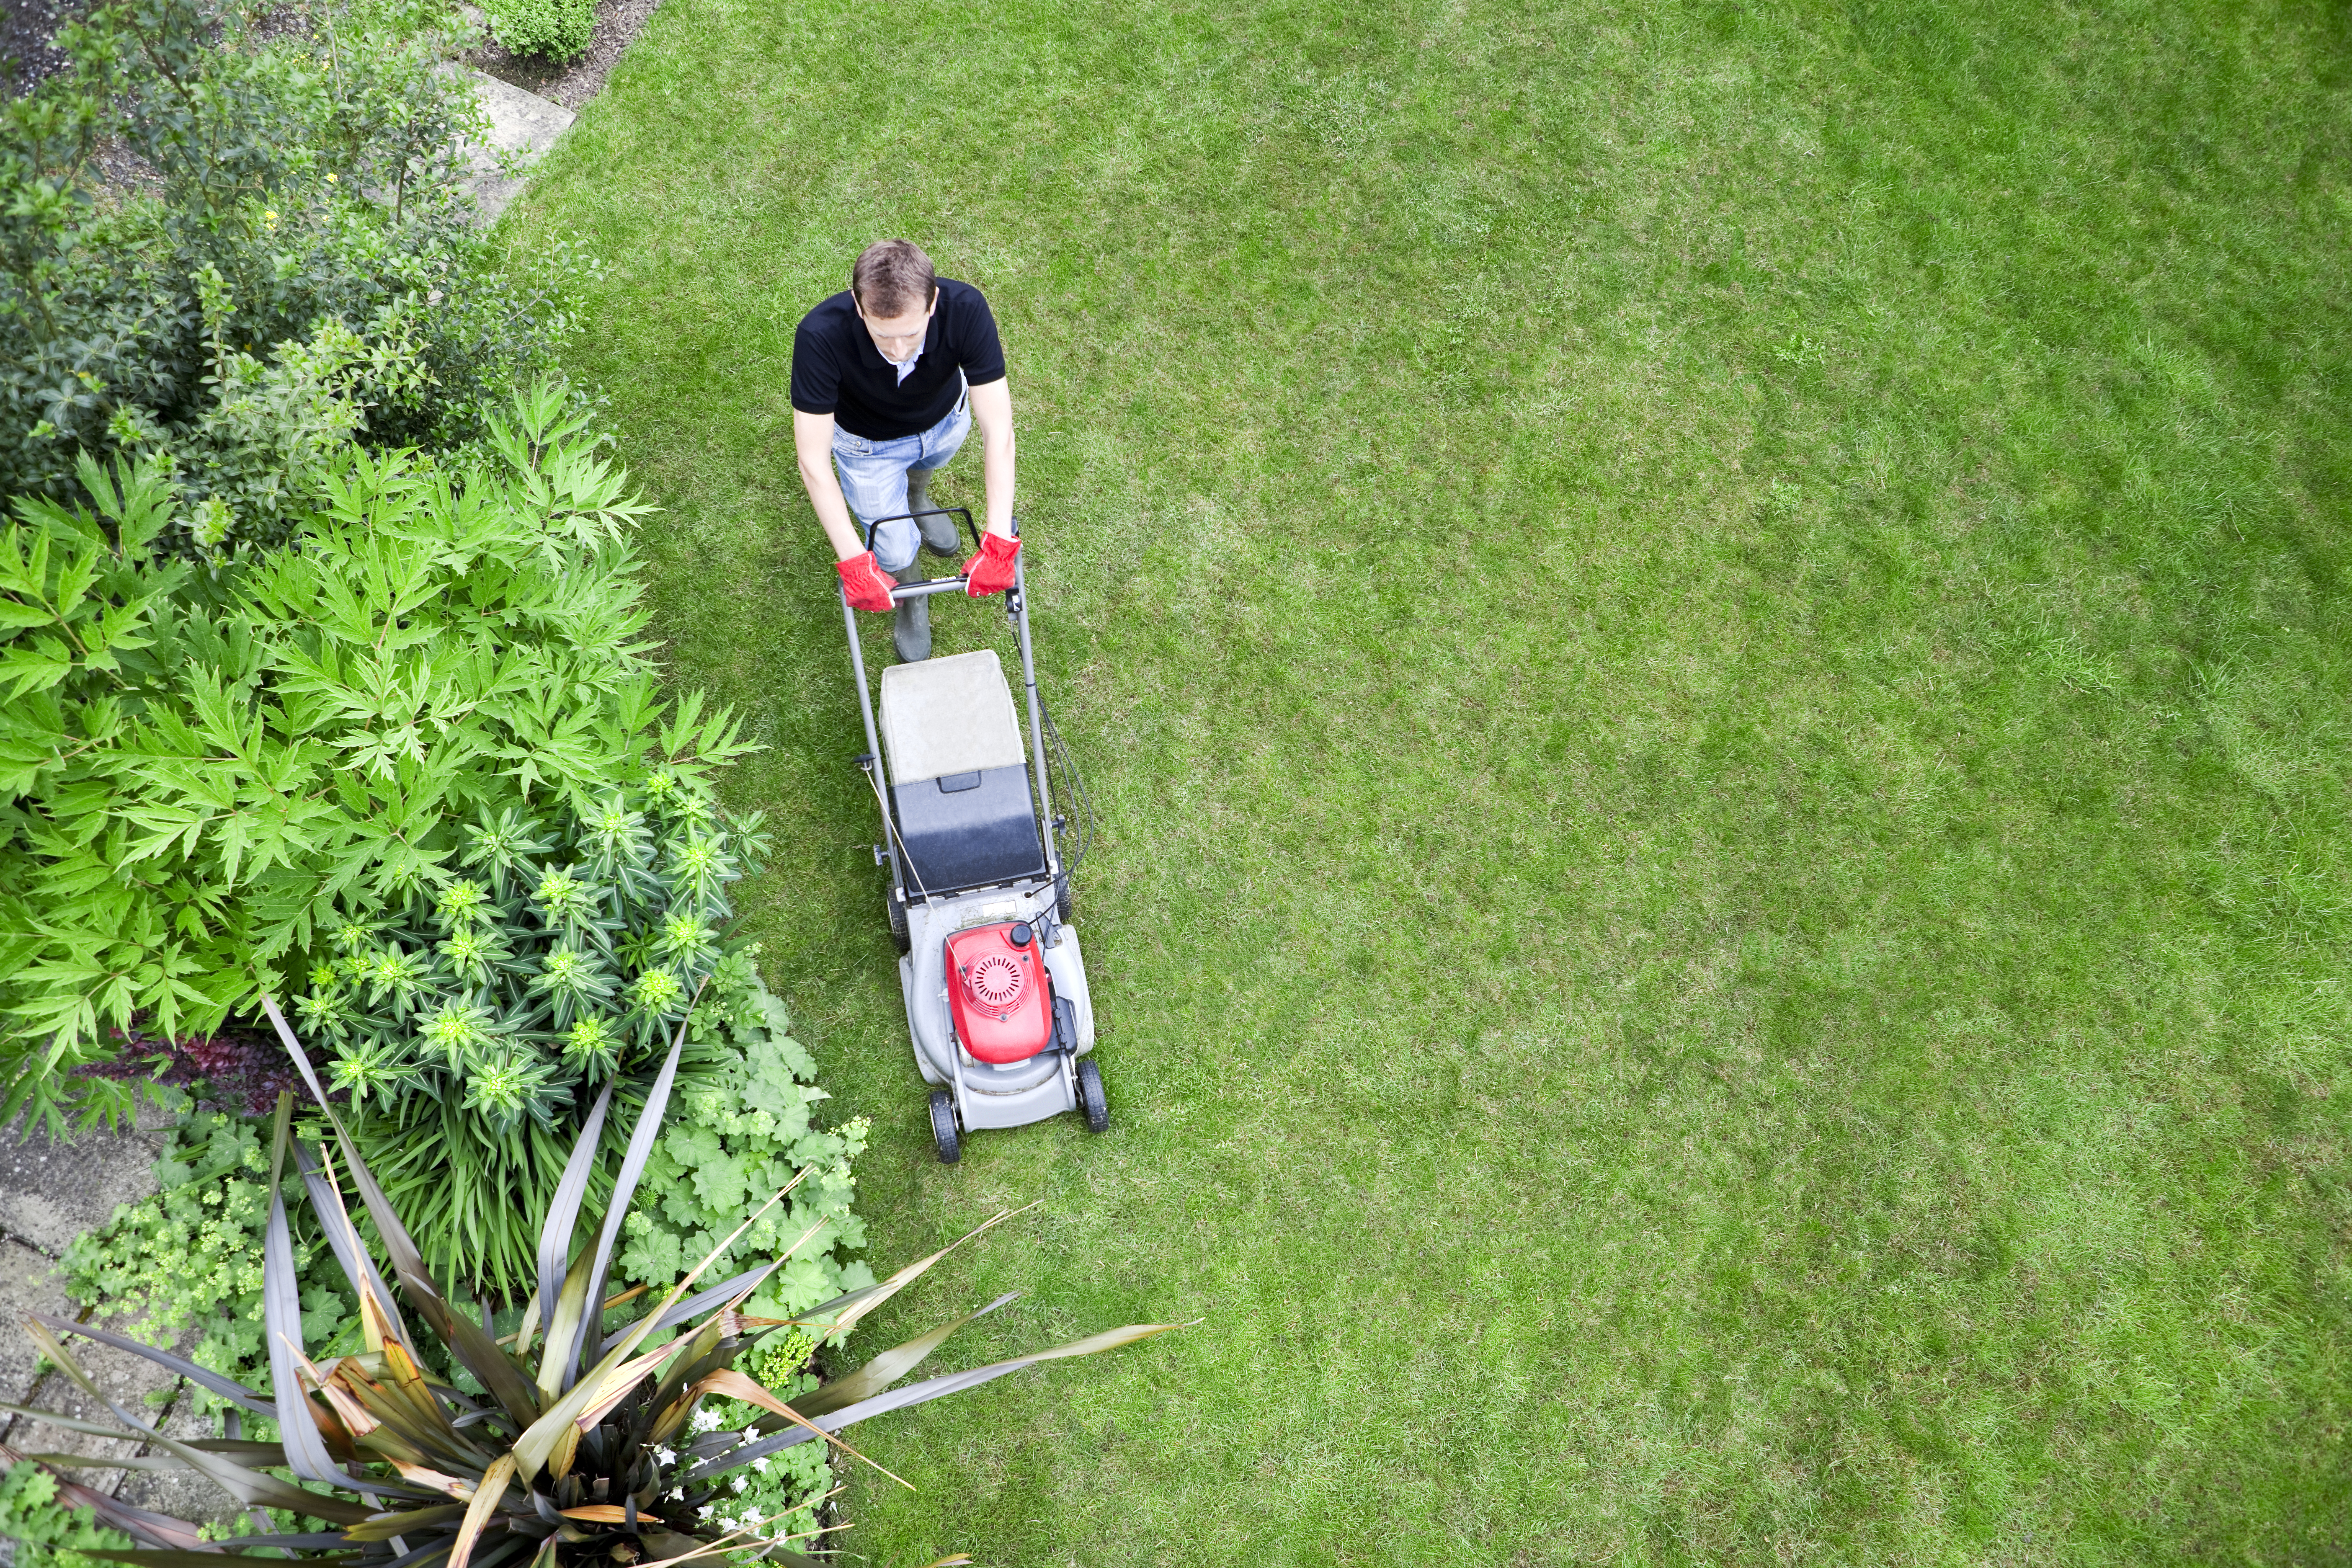 Person Mowing Lawn